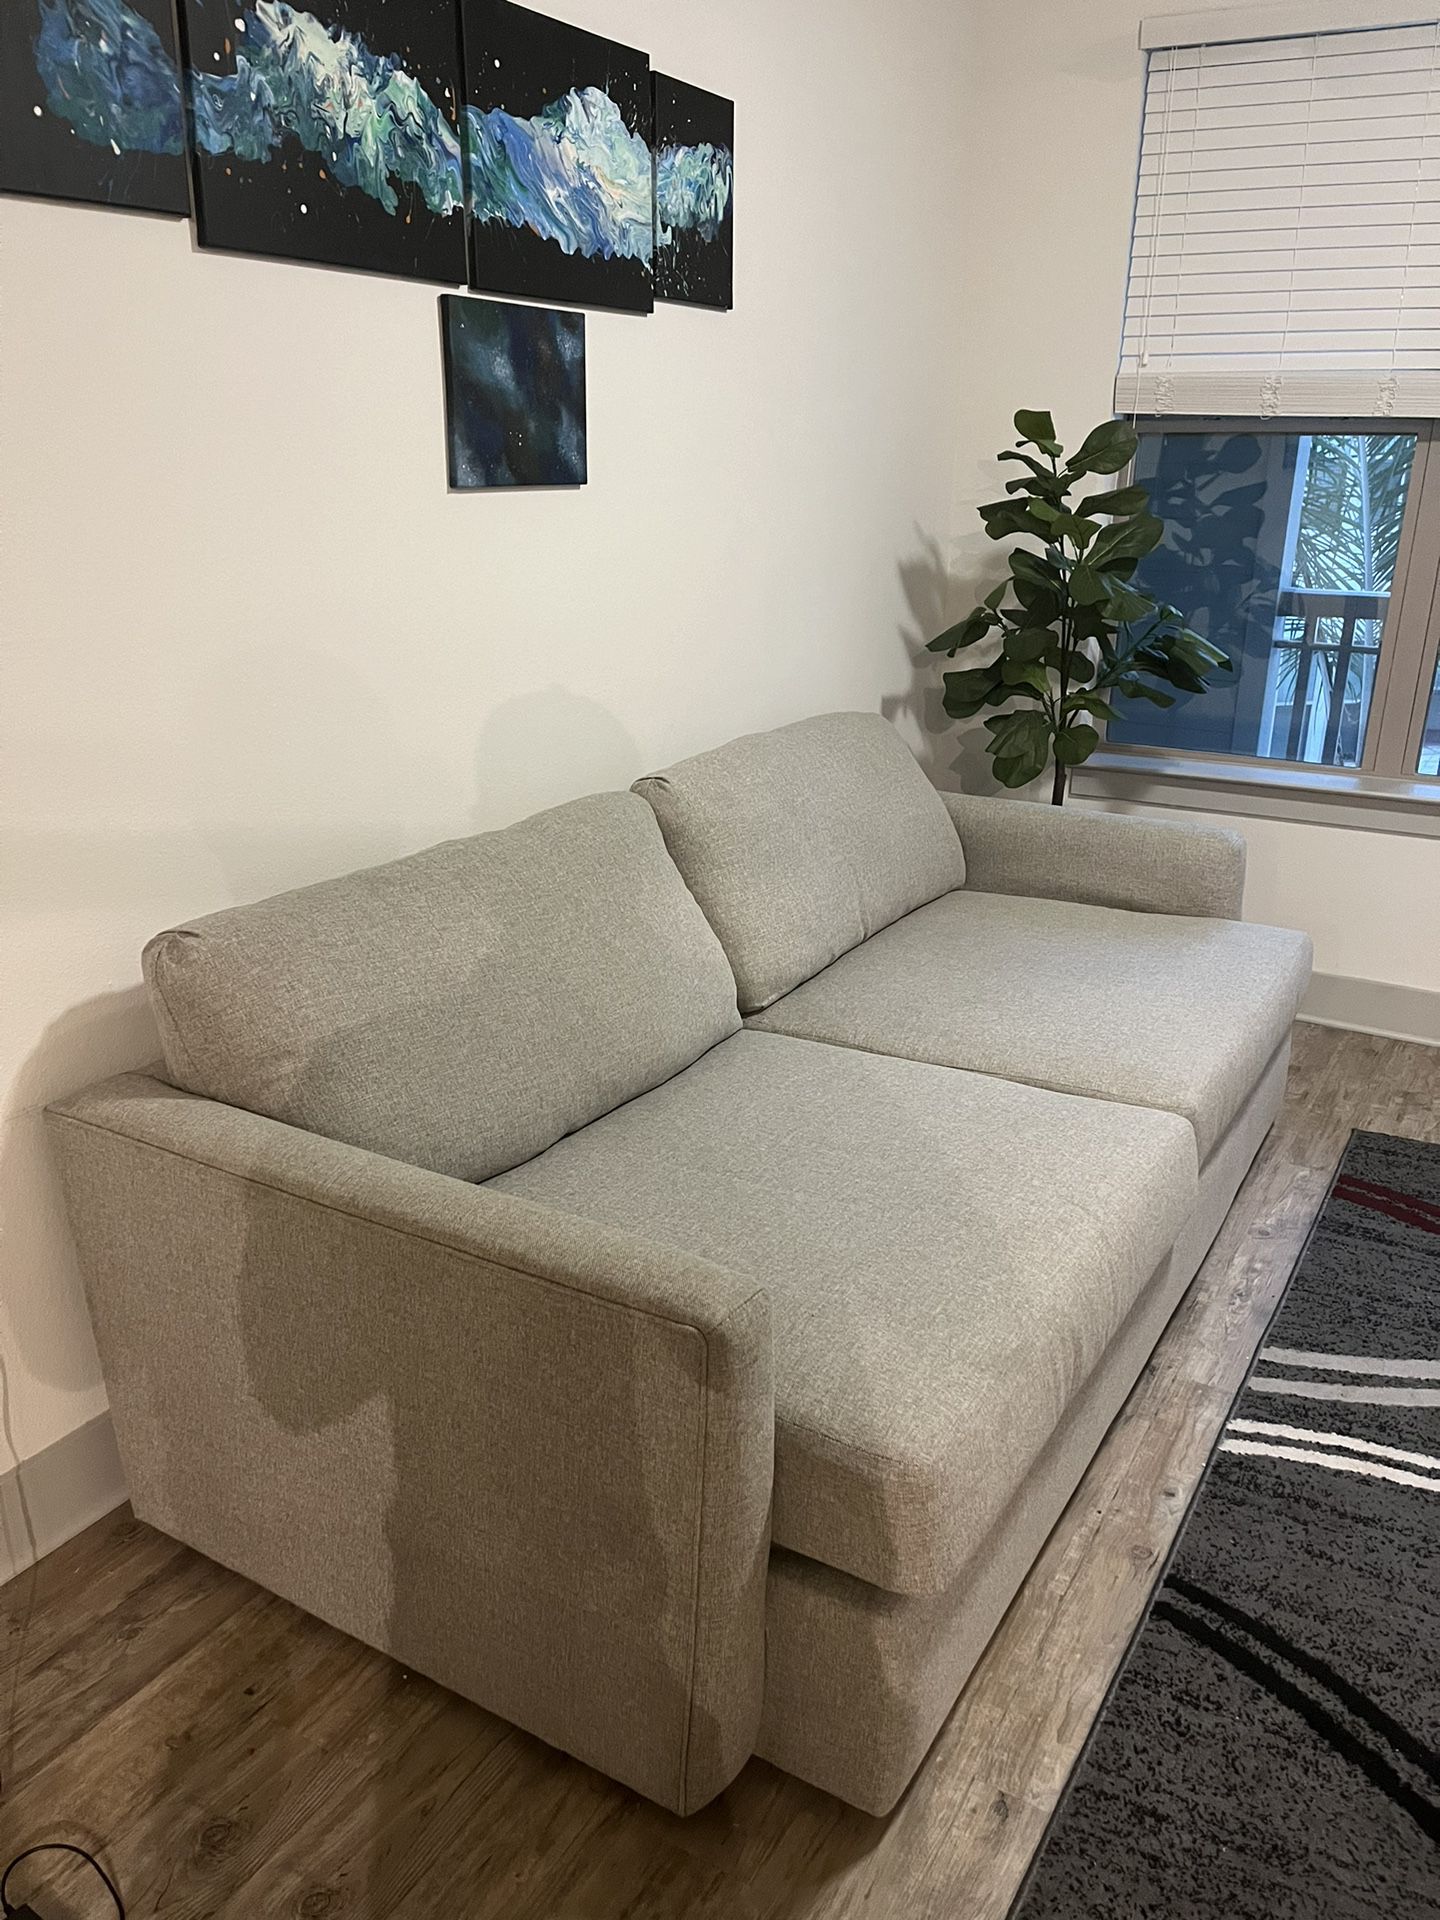 Super Spacious Sofa In Great Conditions